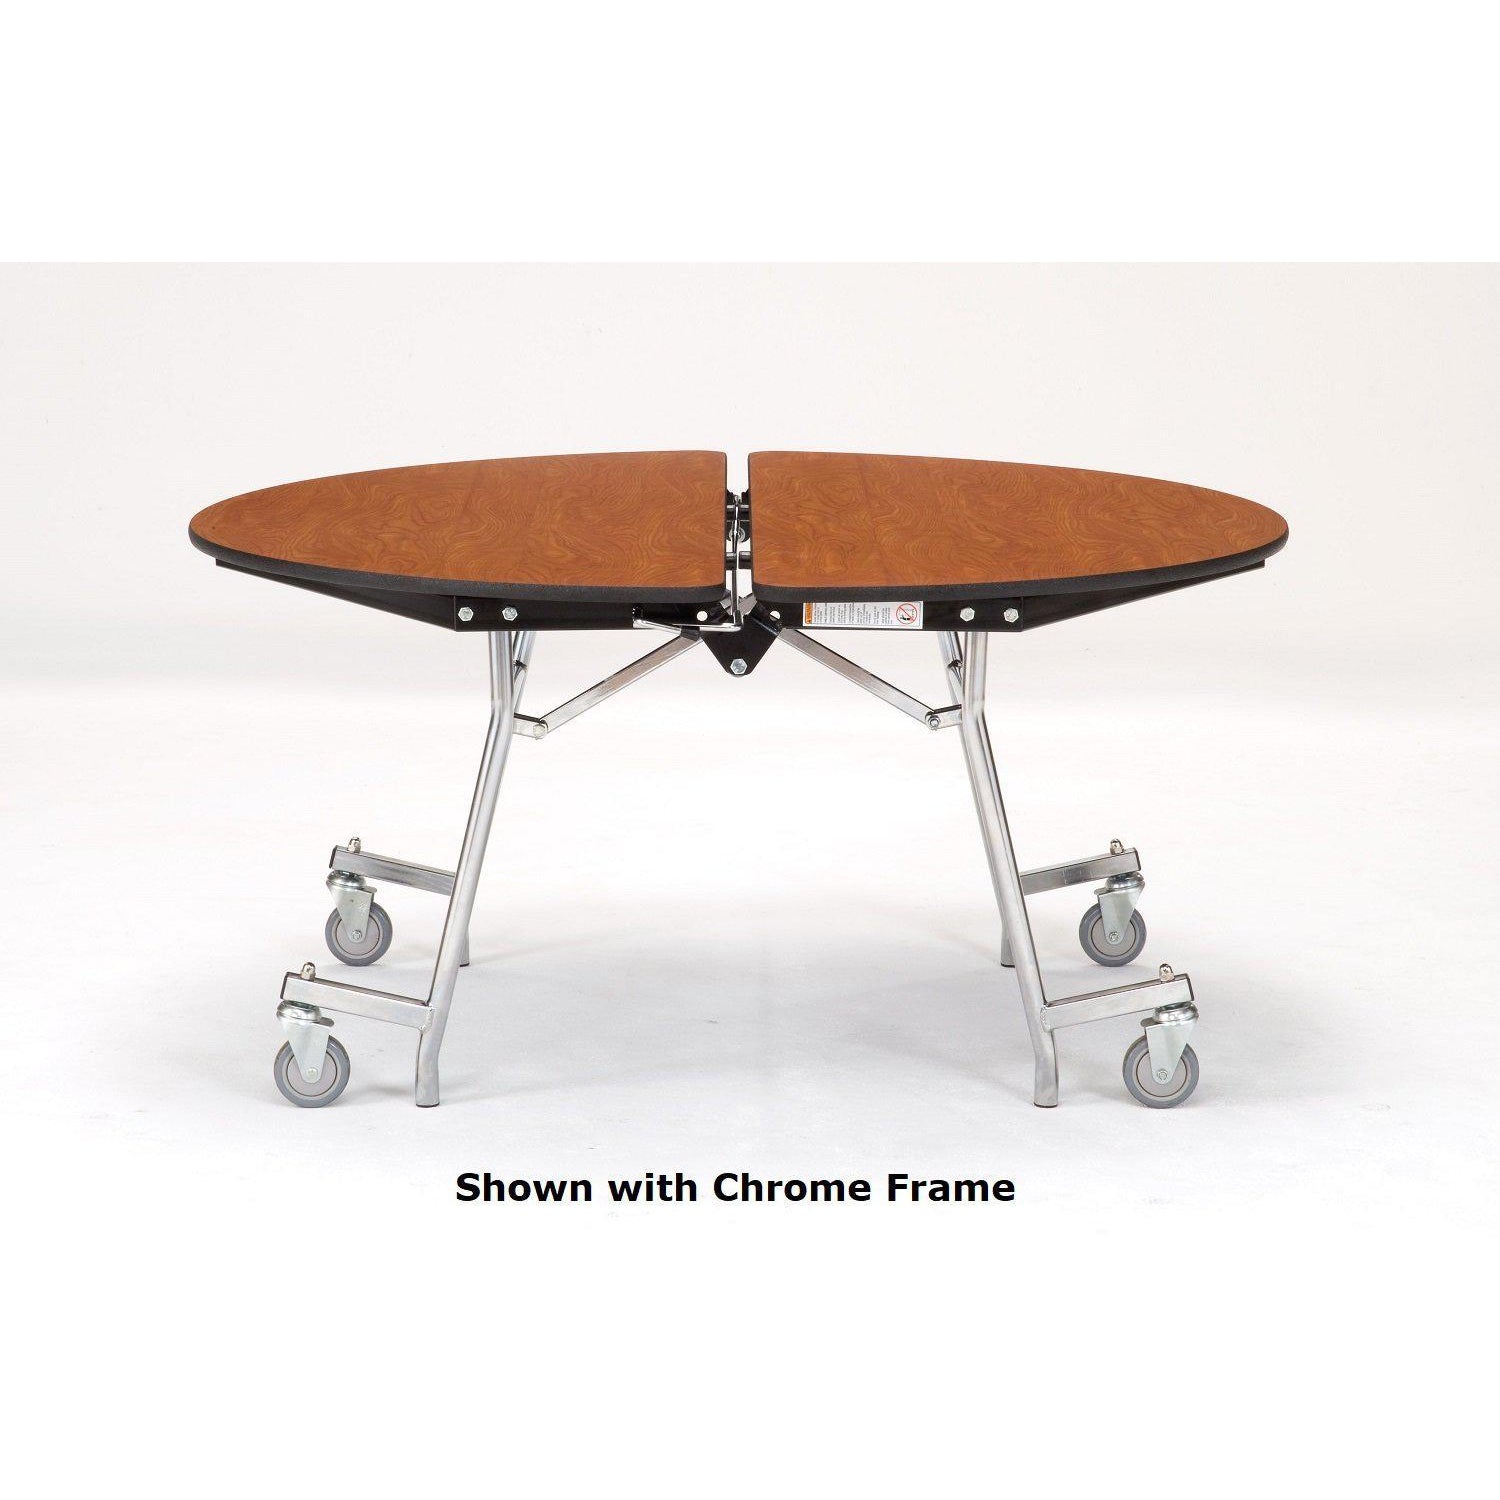 Mobile Shape Cafeteria Table, 60" Round, Plywood Core, Vinyl T-Mold Edge, Chrome Frame